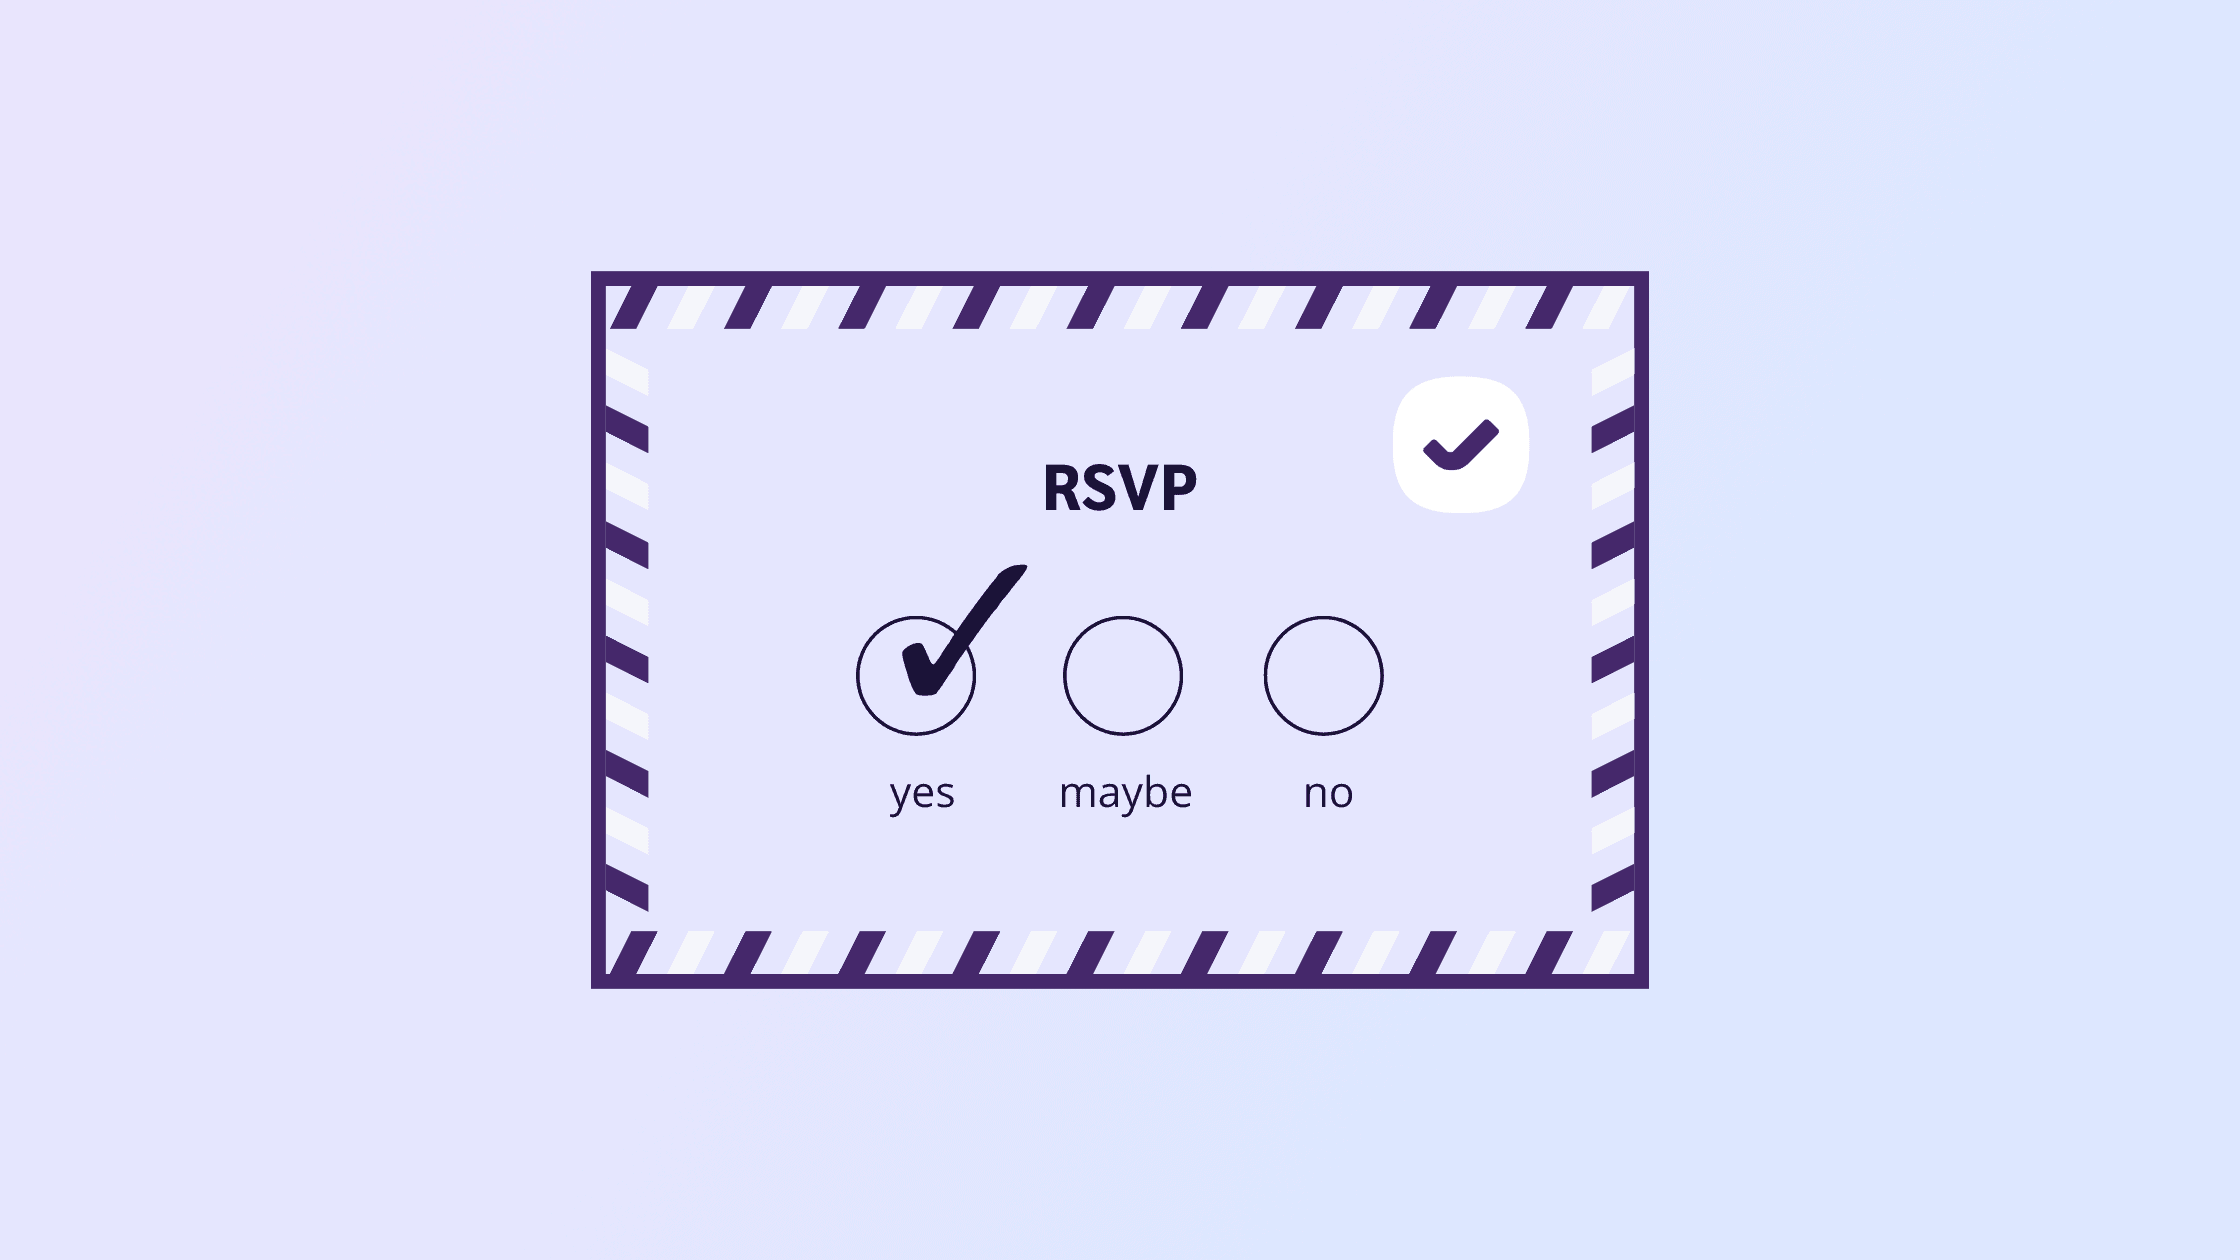 Illustrated RSVP post card with yes, no, maybe response wording